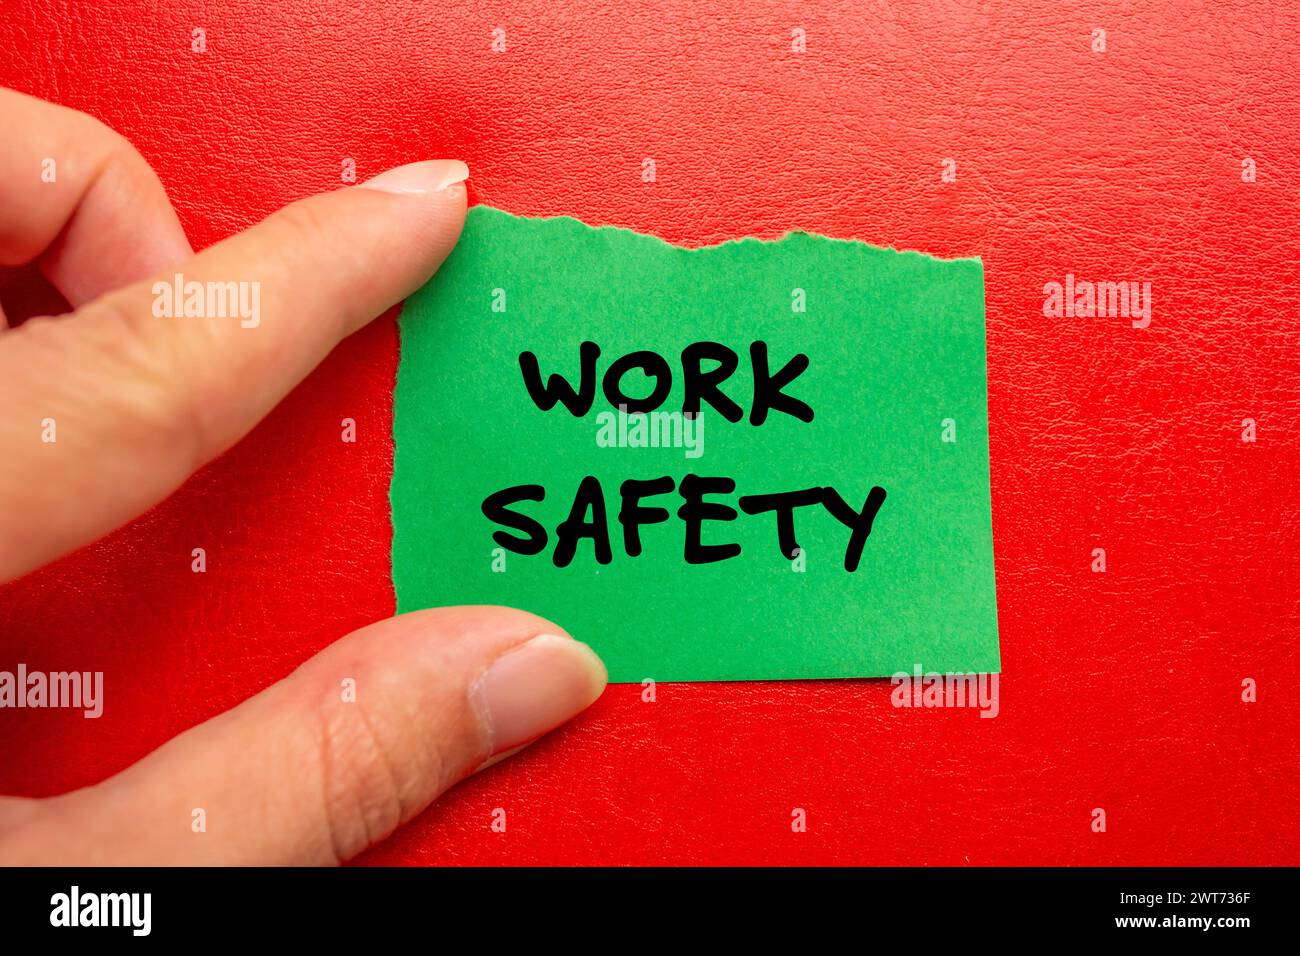 Work safety words written on green torn paper piece with red background. Conceptual symbol. Copy space. Stock Photo